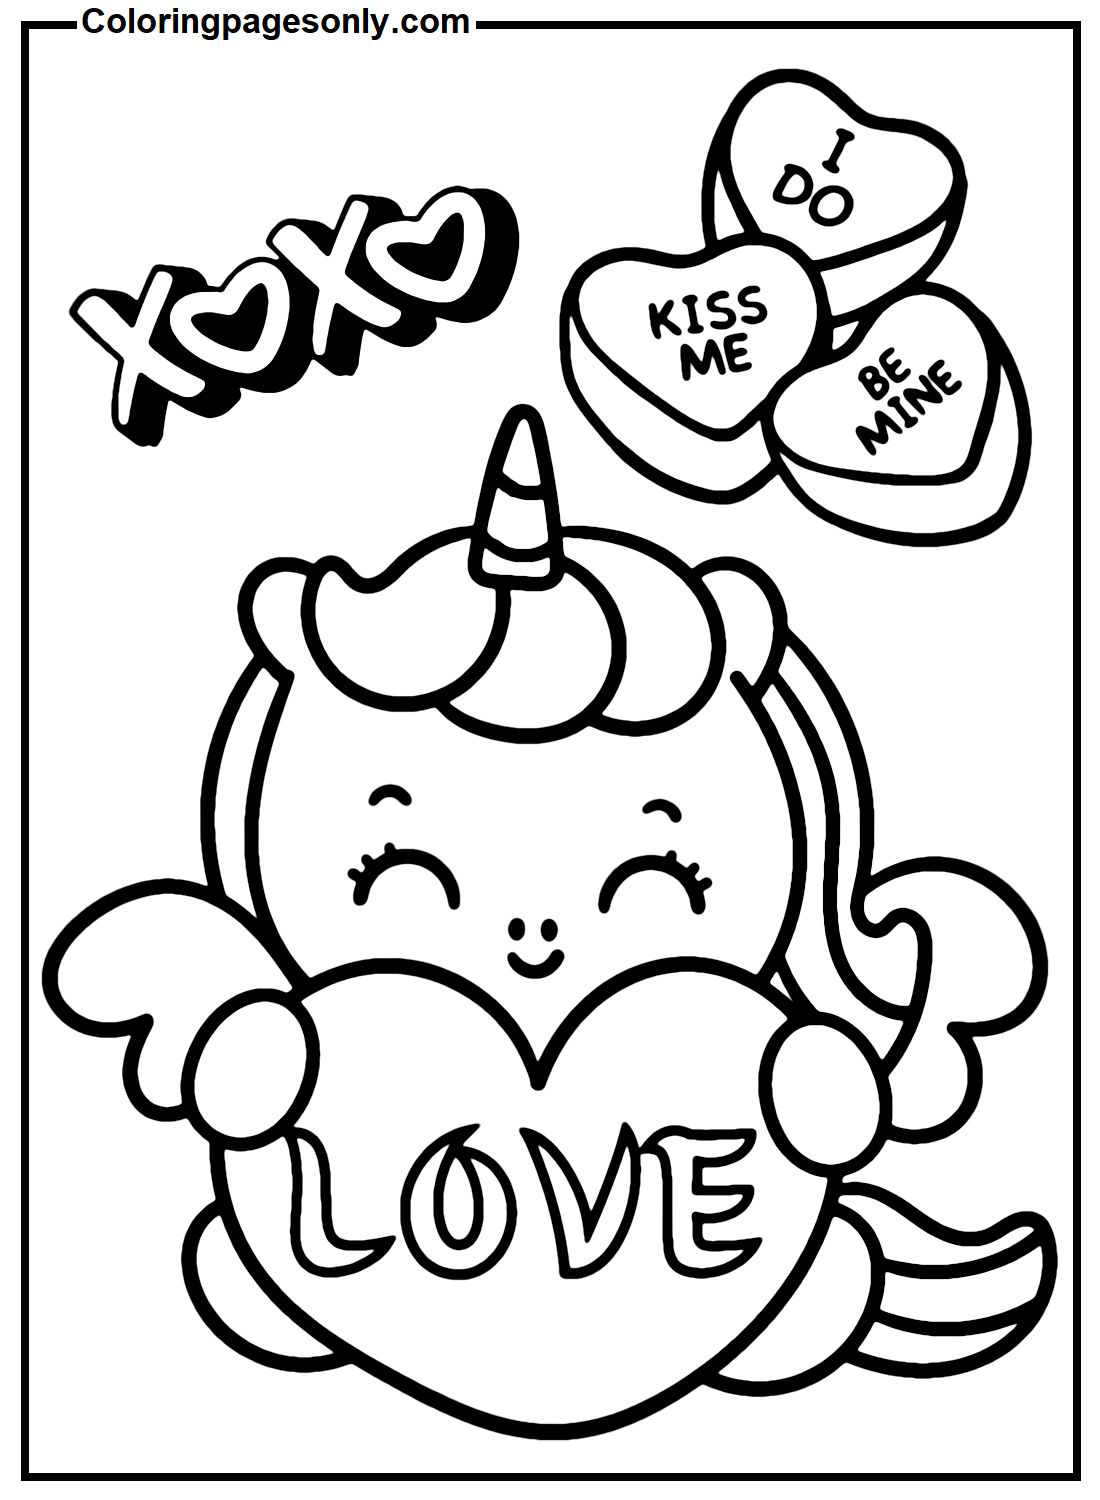 Unicorn With Heart In Valentine's Day Coloring Pages